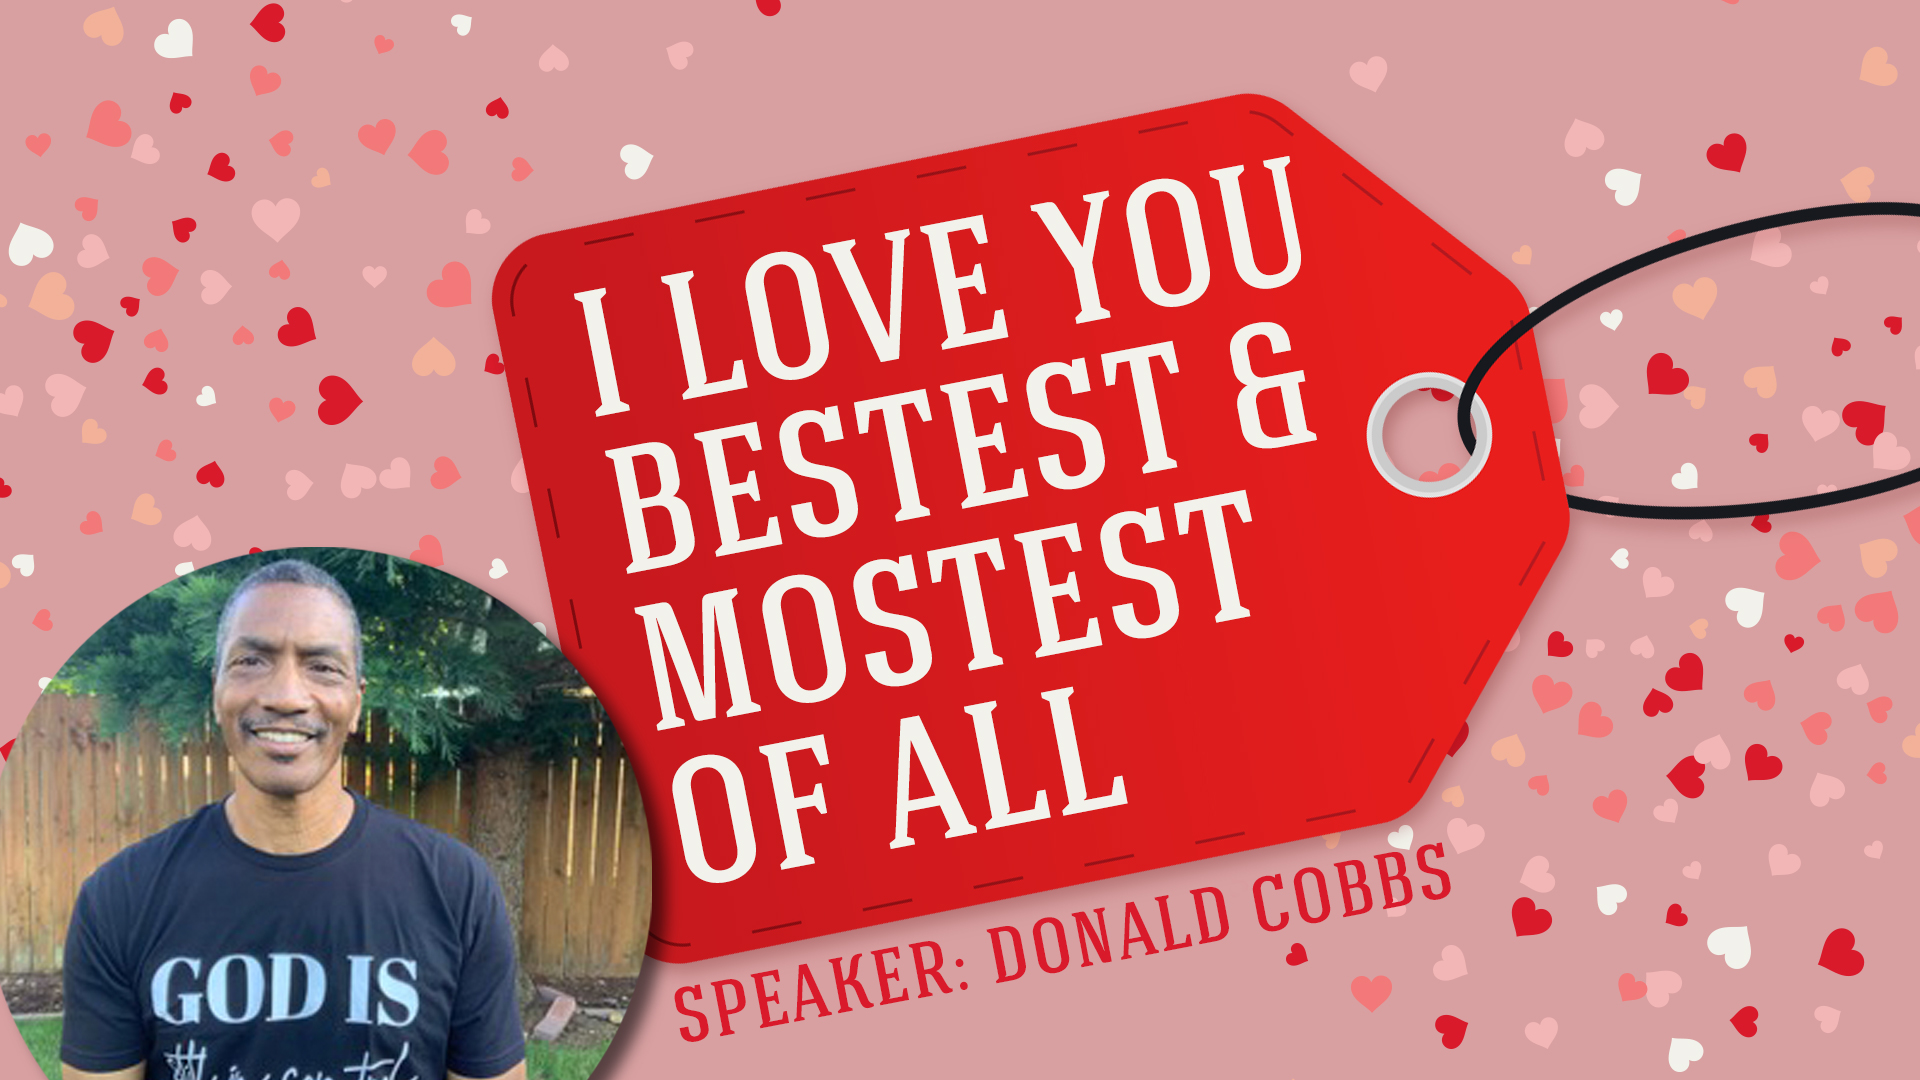 I Love You Bestest & Mostest of All | Speaker Donald Cobbs